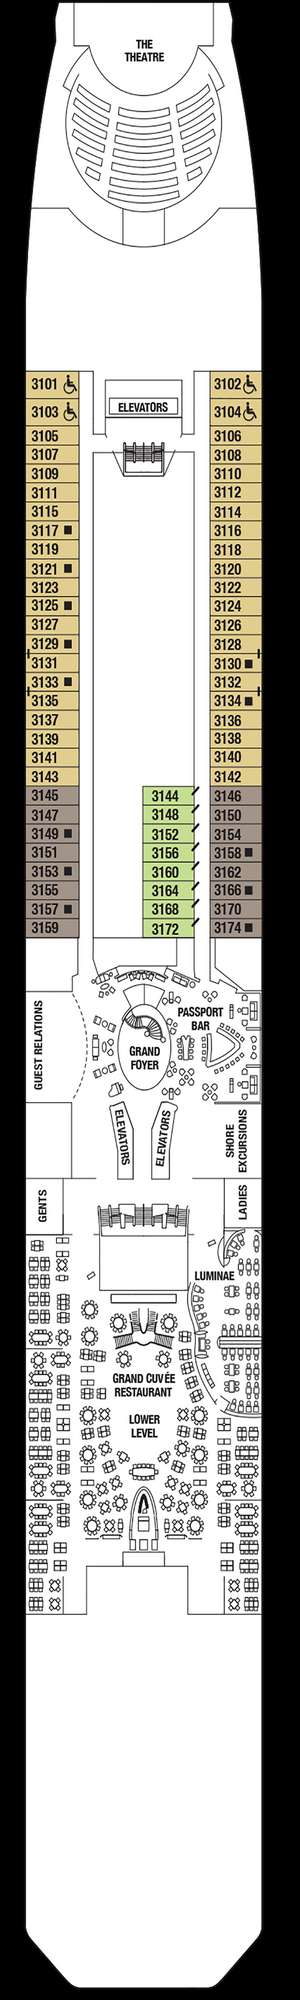 Deck plan for Celebrity Silhouette